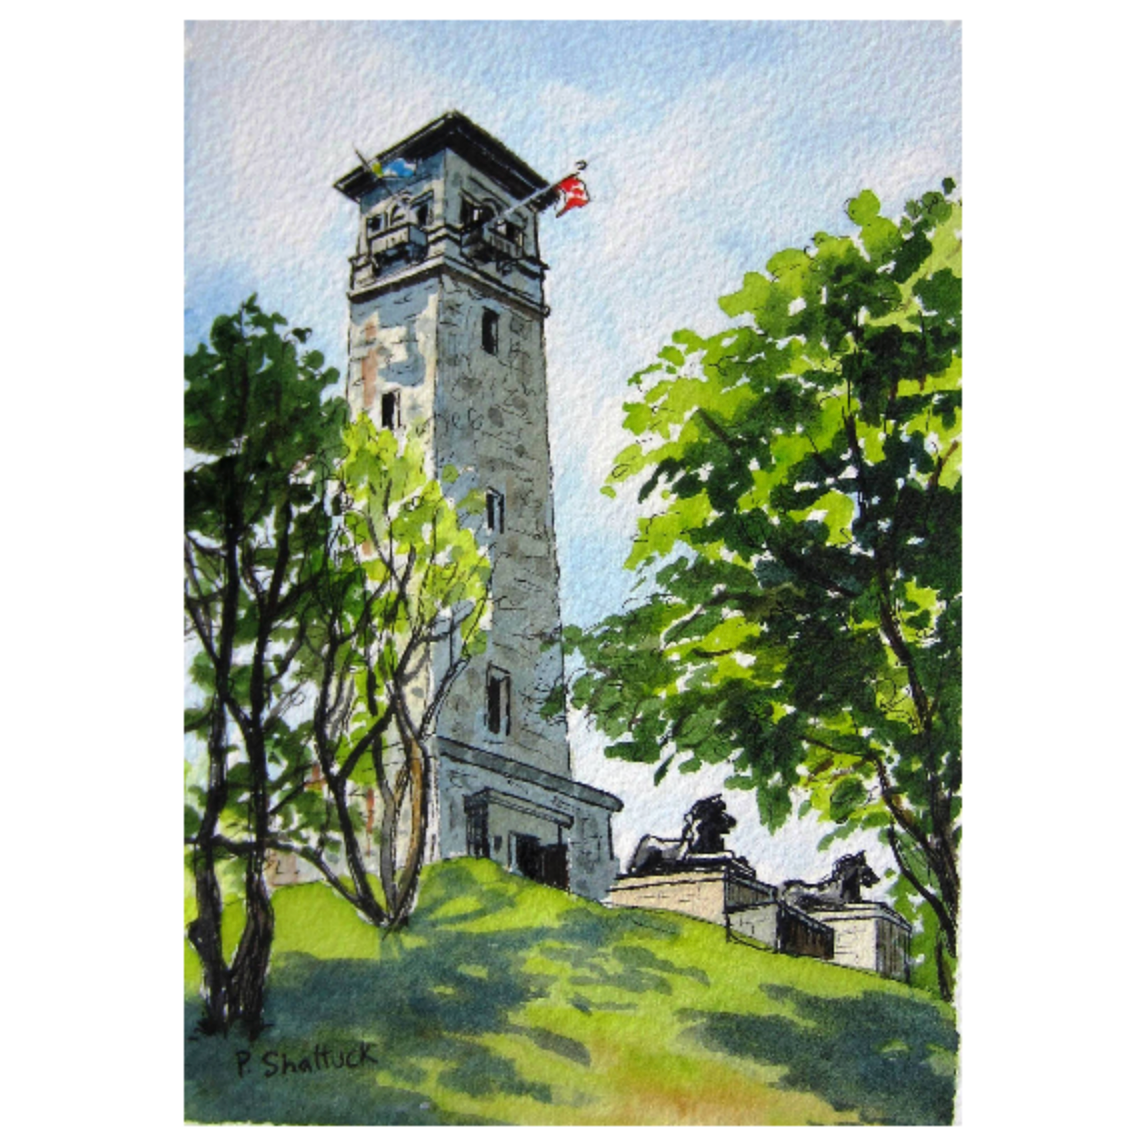 Pat Shattuck Greeting Card - The Dingle Tower and Lions, Halifax